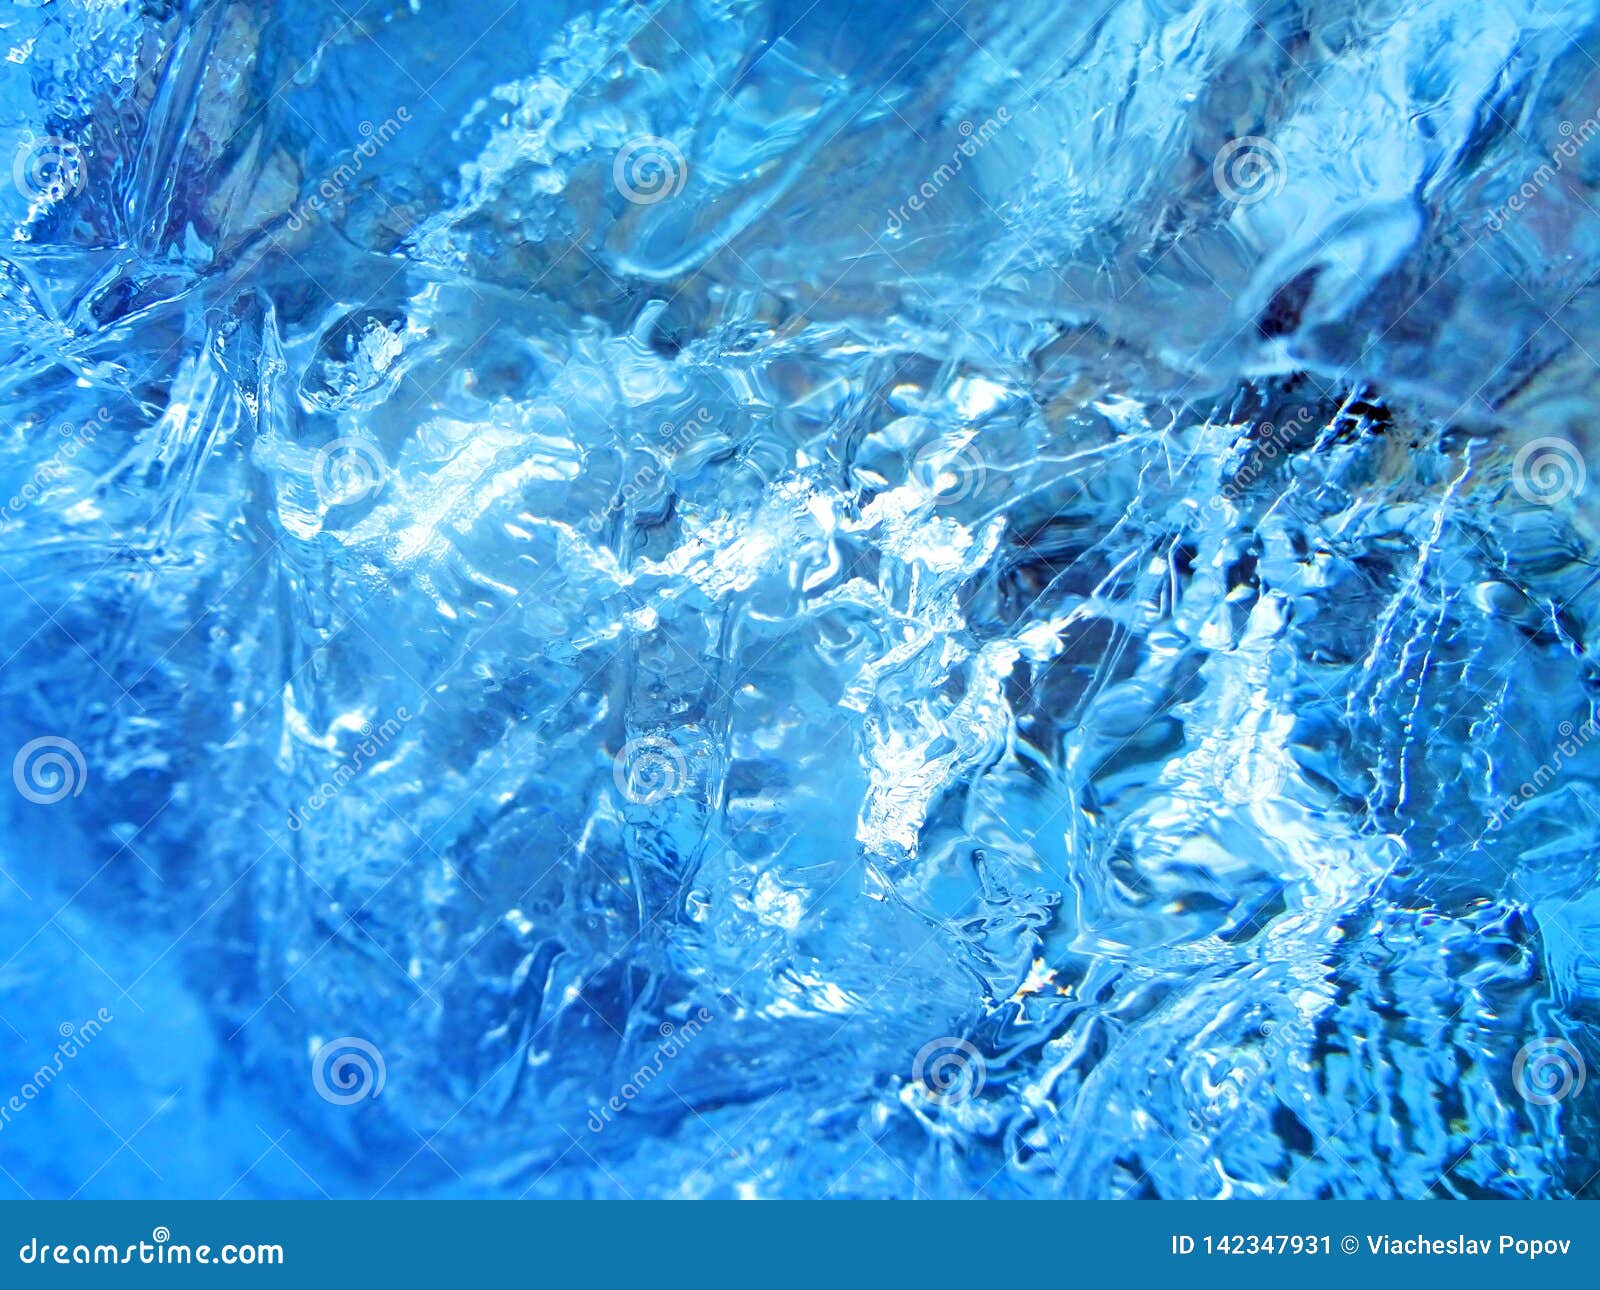 Abstract Blue Ice Background Stock Image - Image of blend, chaos: 142347931